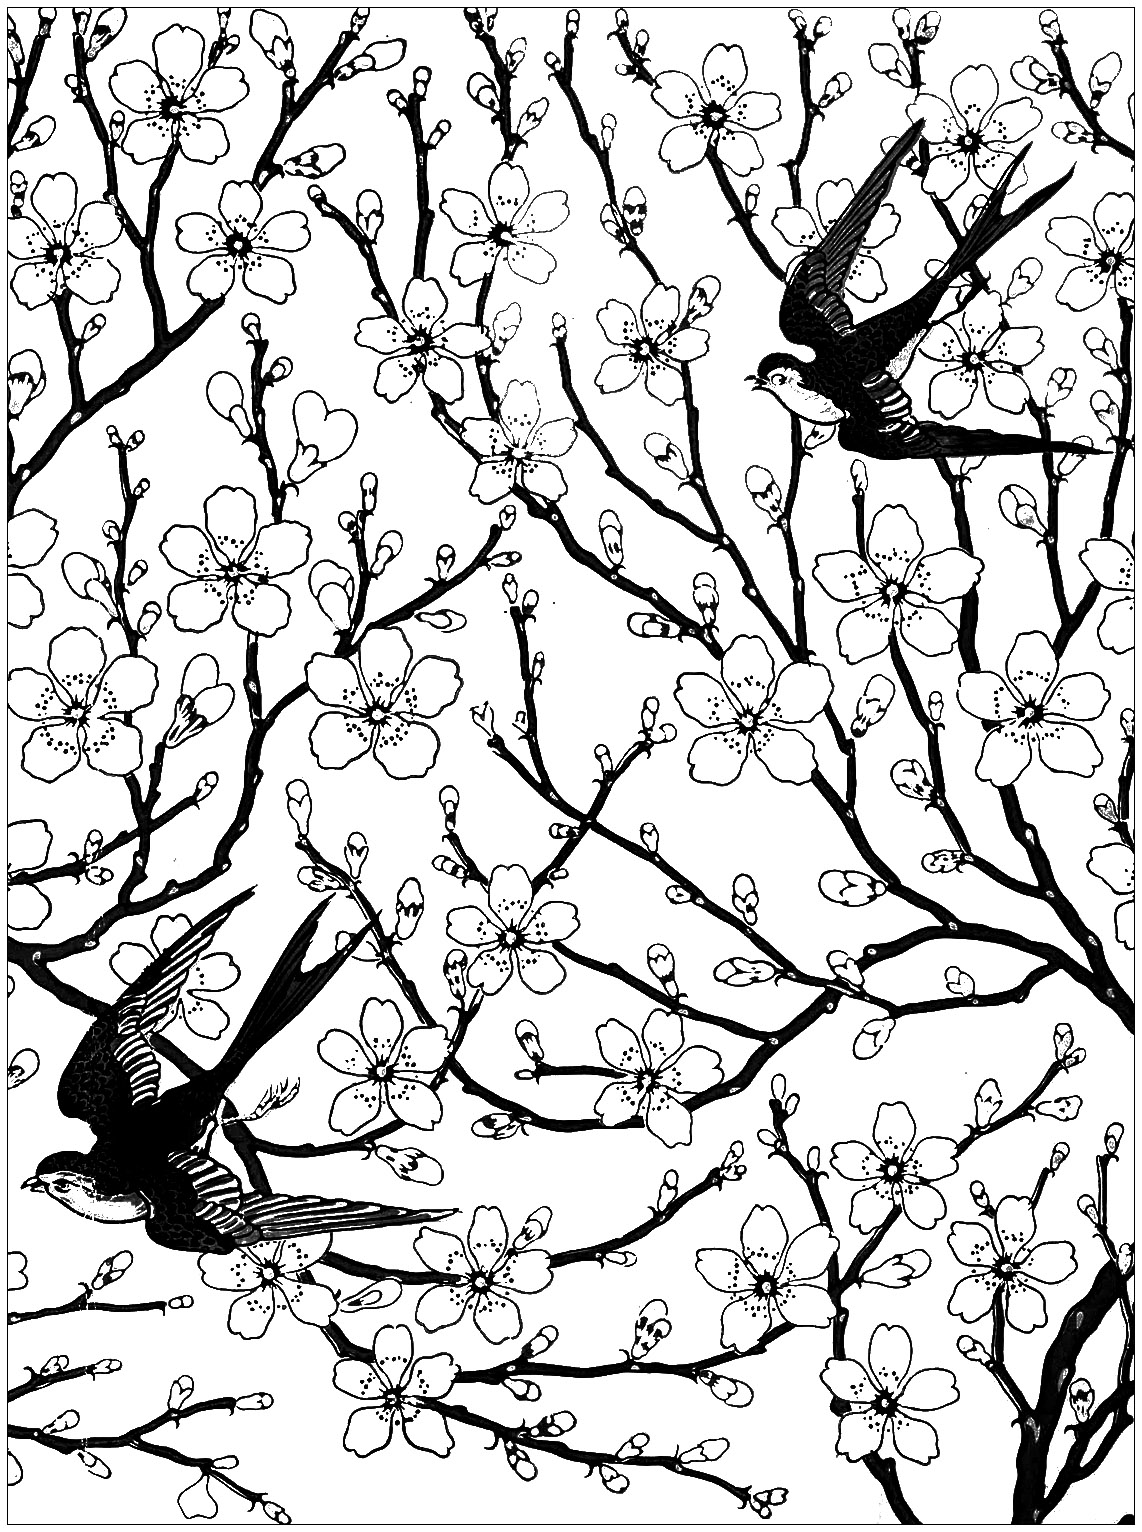 Almond blossom and swallow, coloring page inspired by a wallpaper frieze by Walter Crane (1878), Artist : Art. Isabelle